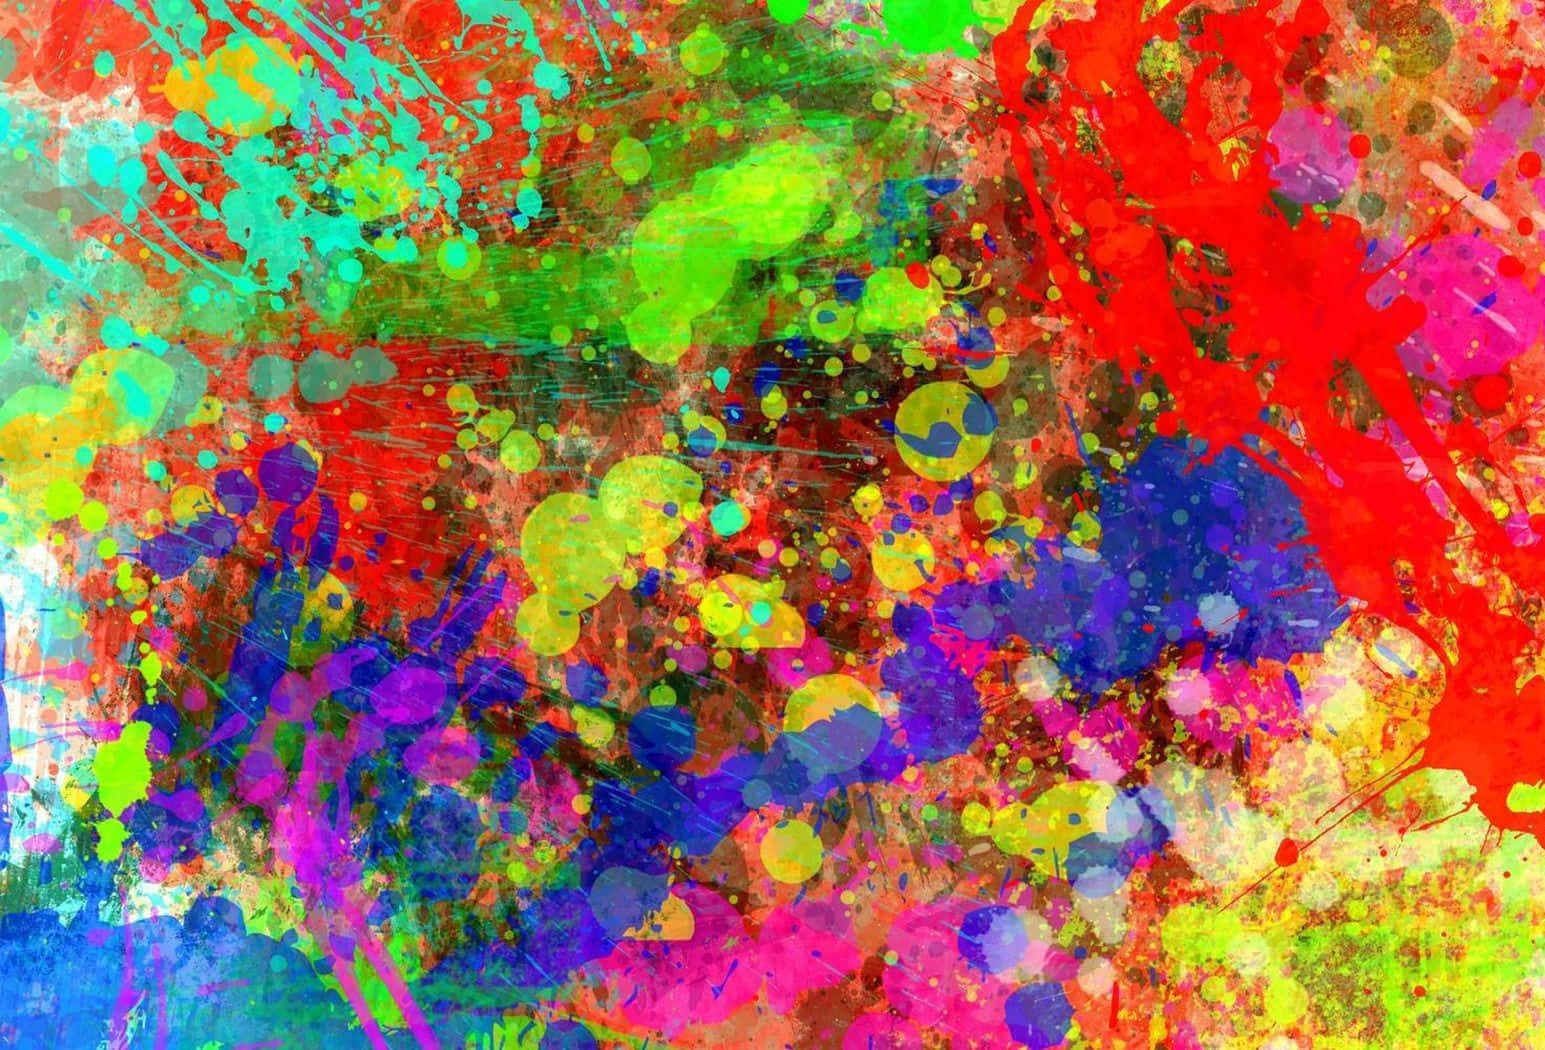 A Colorful Abstract Painting With Paint Splatters